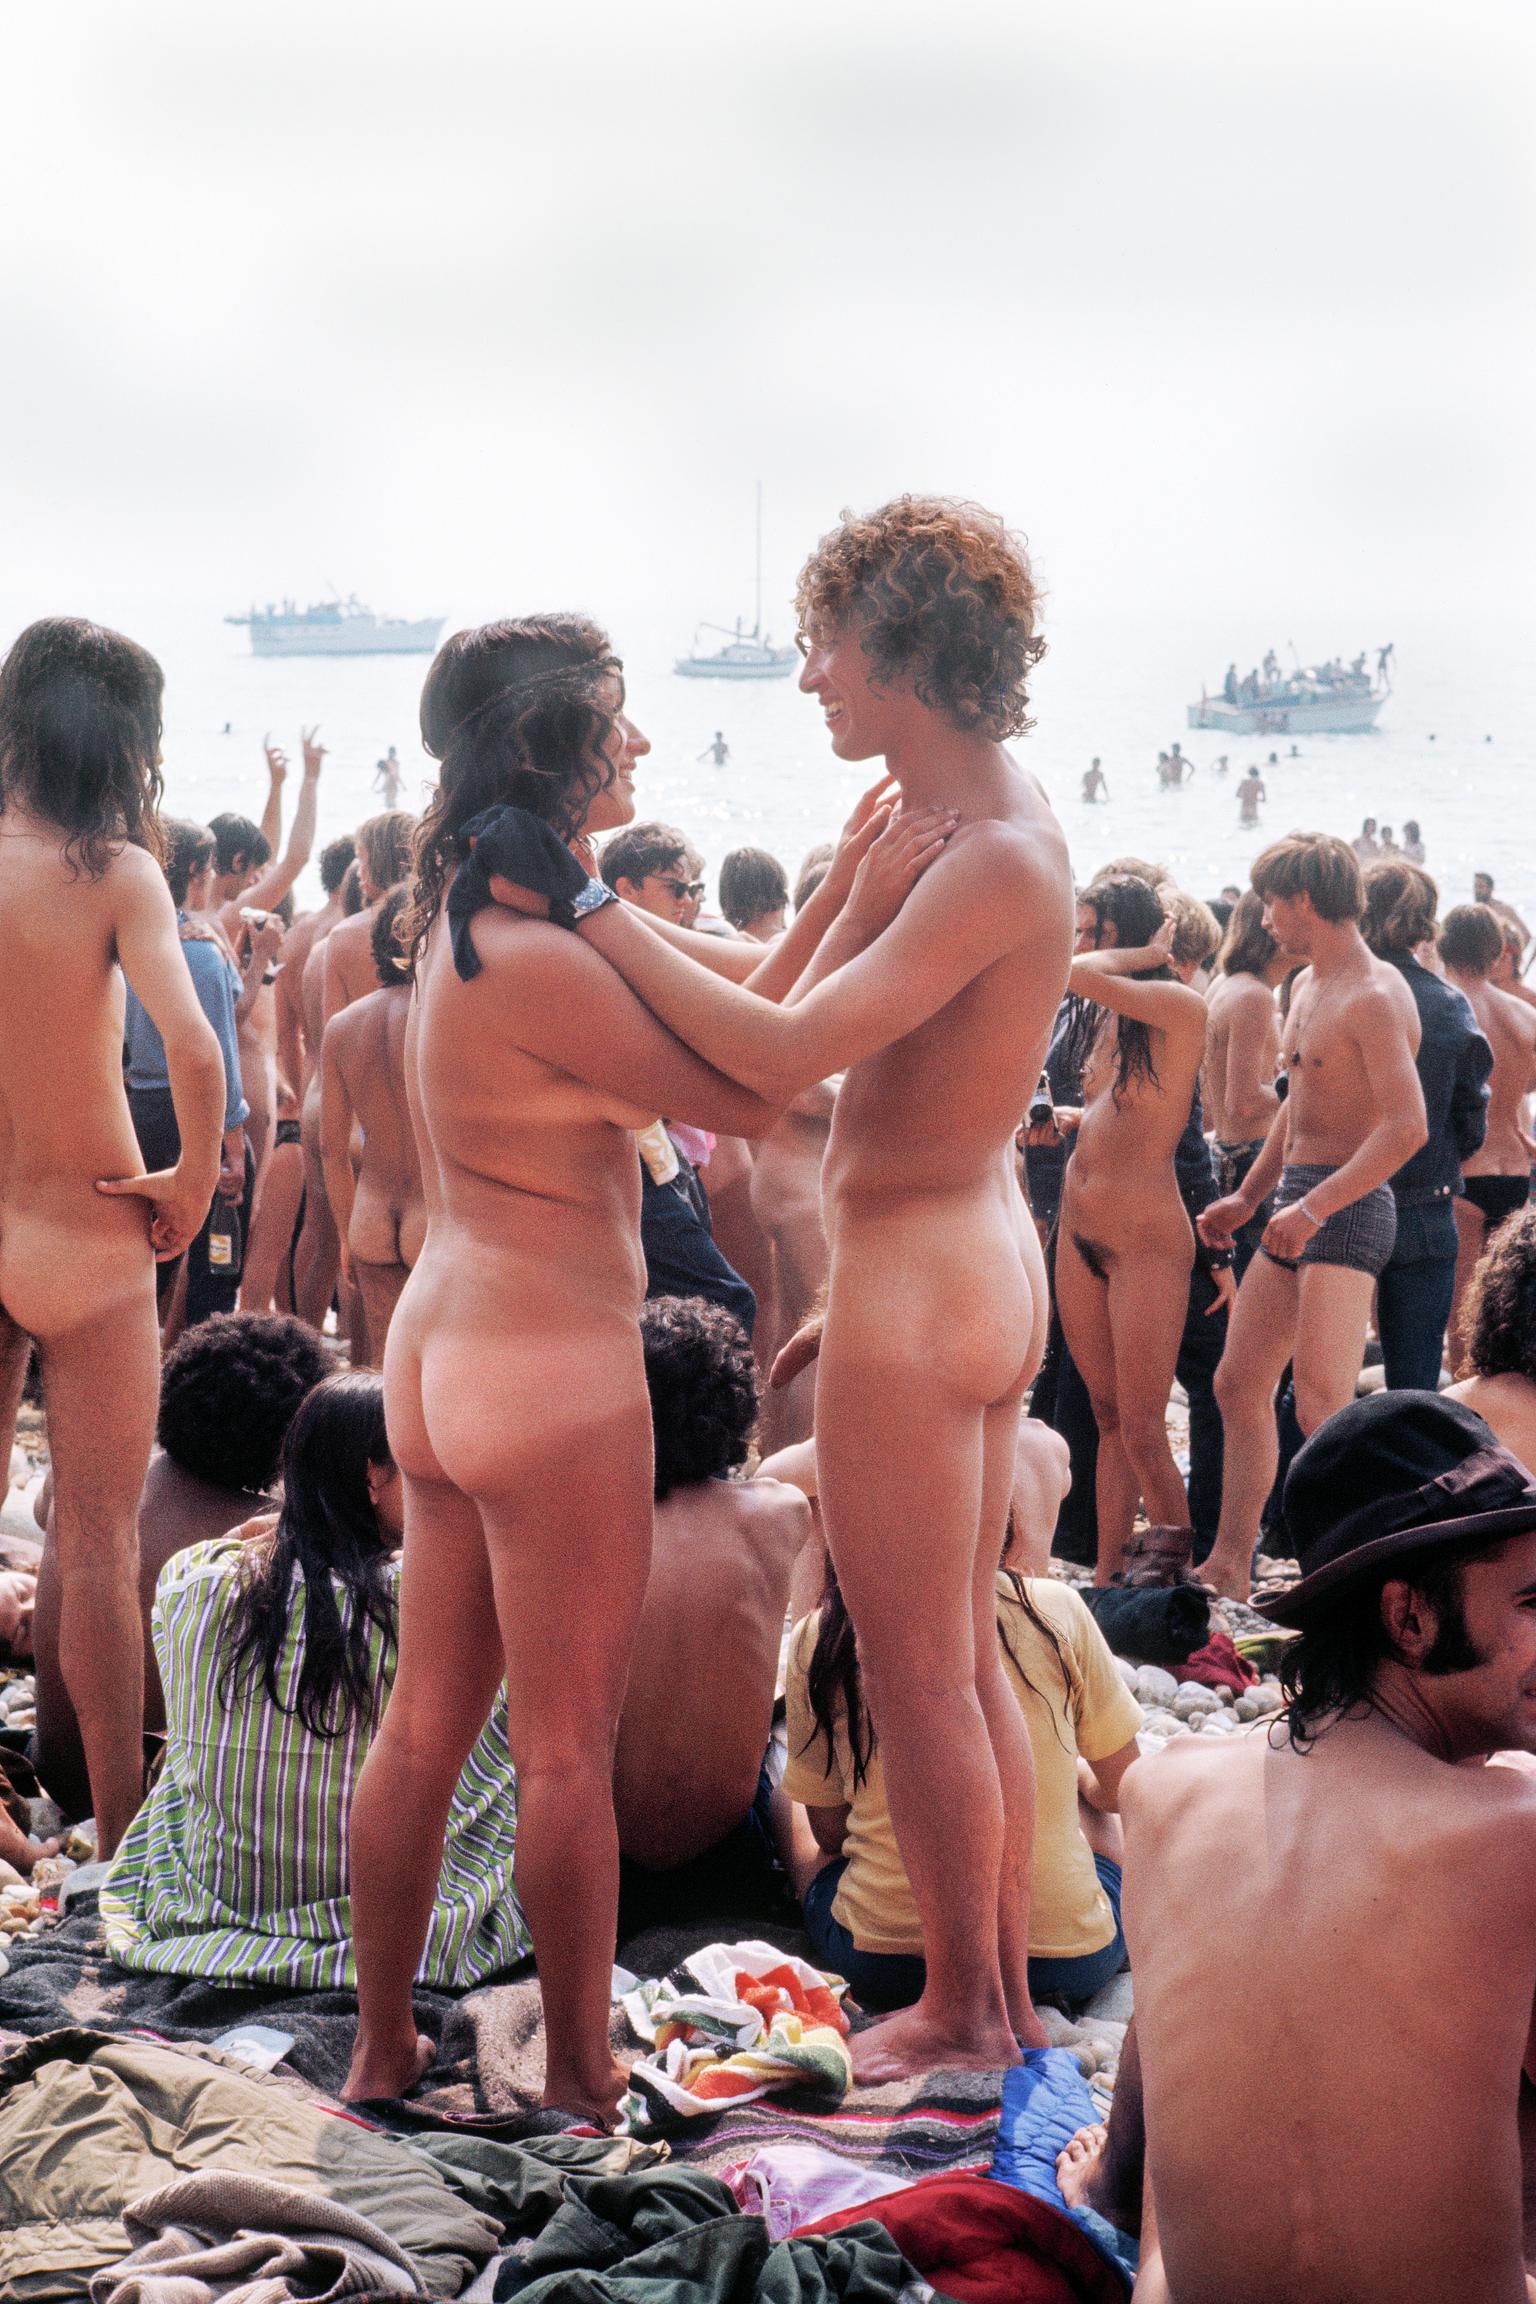 Isle of Wight Festival. At one point 300 people stripped naked and dashed into the sea